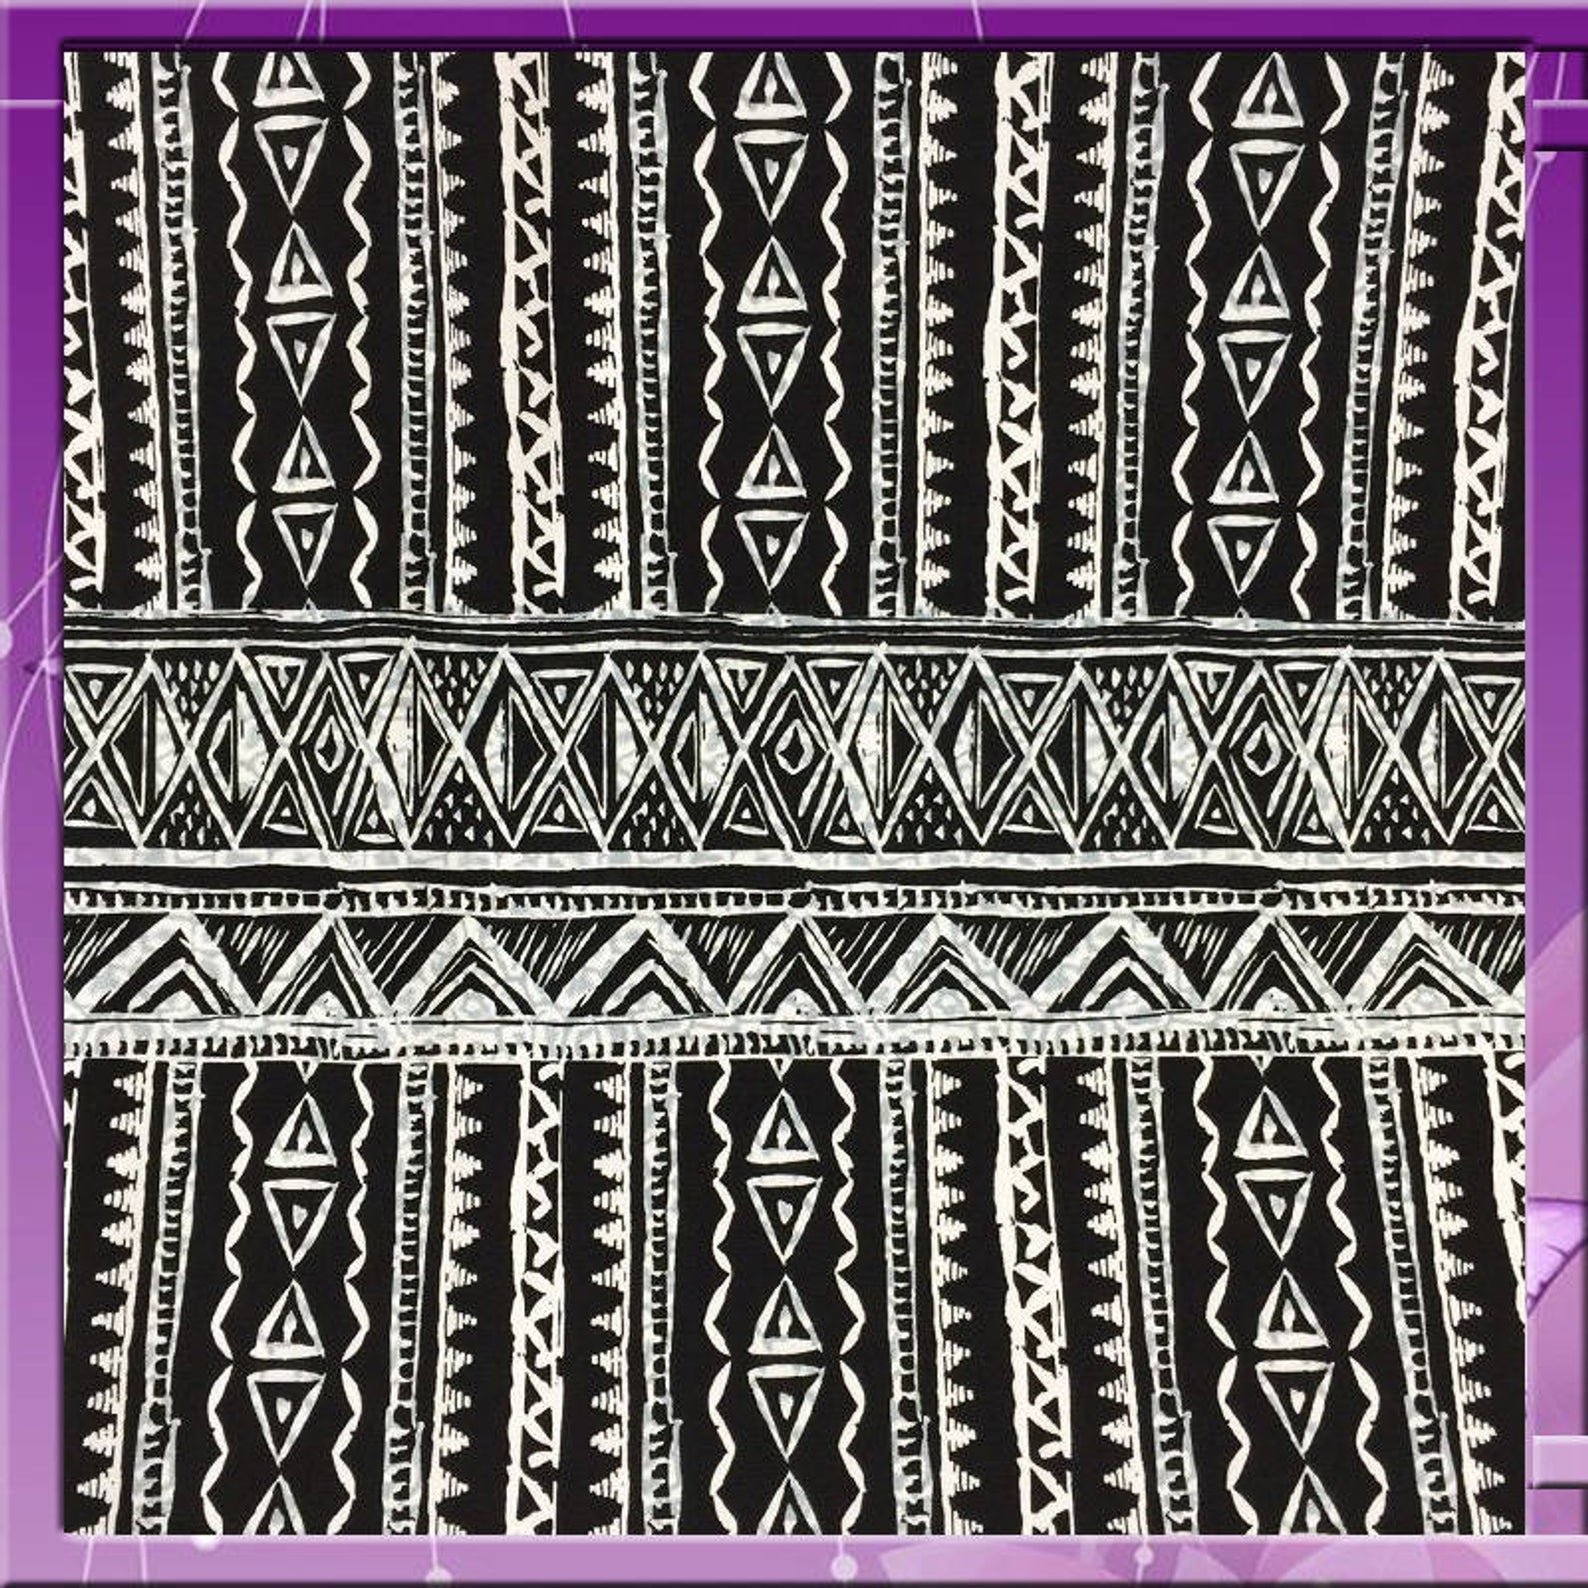 100% Rayon Challis Black N White African Bintu Print 58 Inches Wide Fabric Sold by the Yard Black and WhiteICE FABRICSICE FABRICS1100% Rayon Challis Black N White African Bintu Print 58 Inches Wide Fabric Sold by the Yard Black and White ICE FABRICS